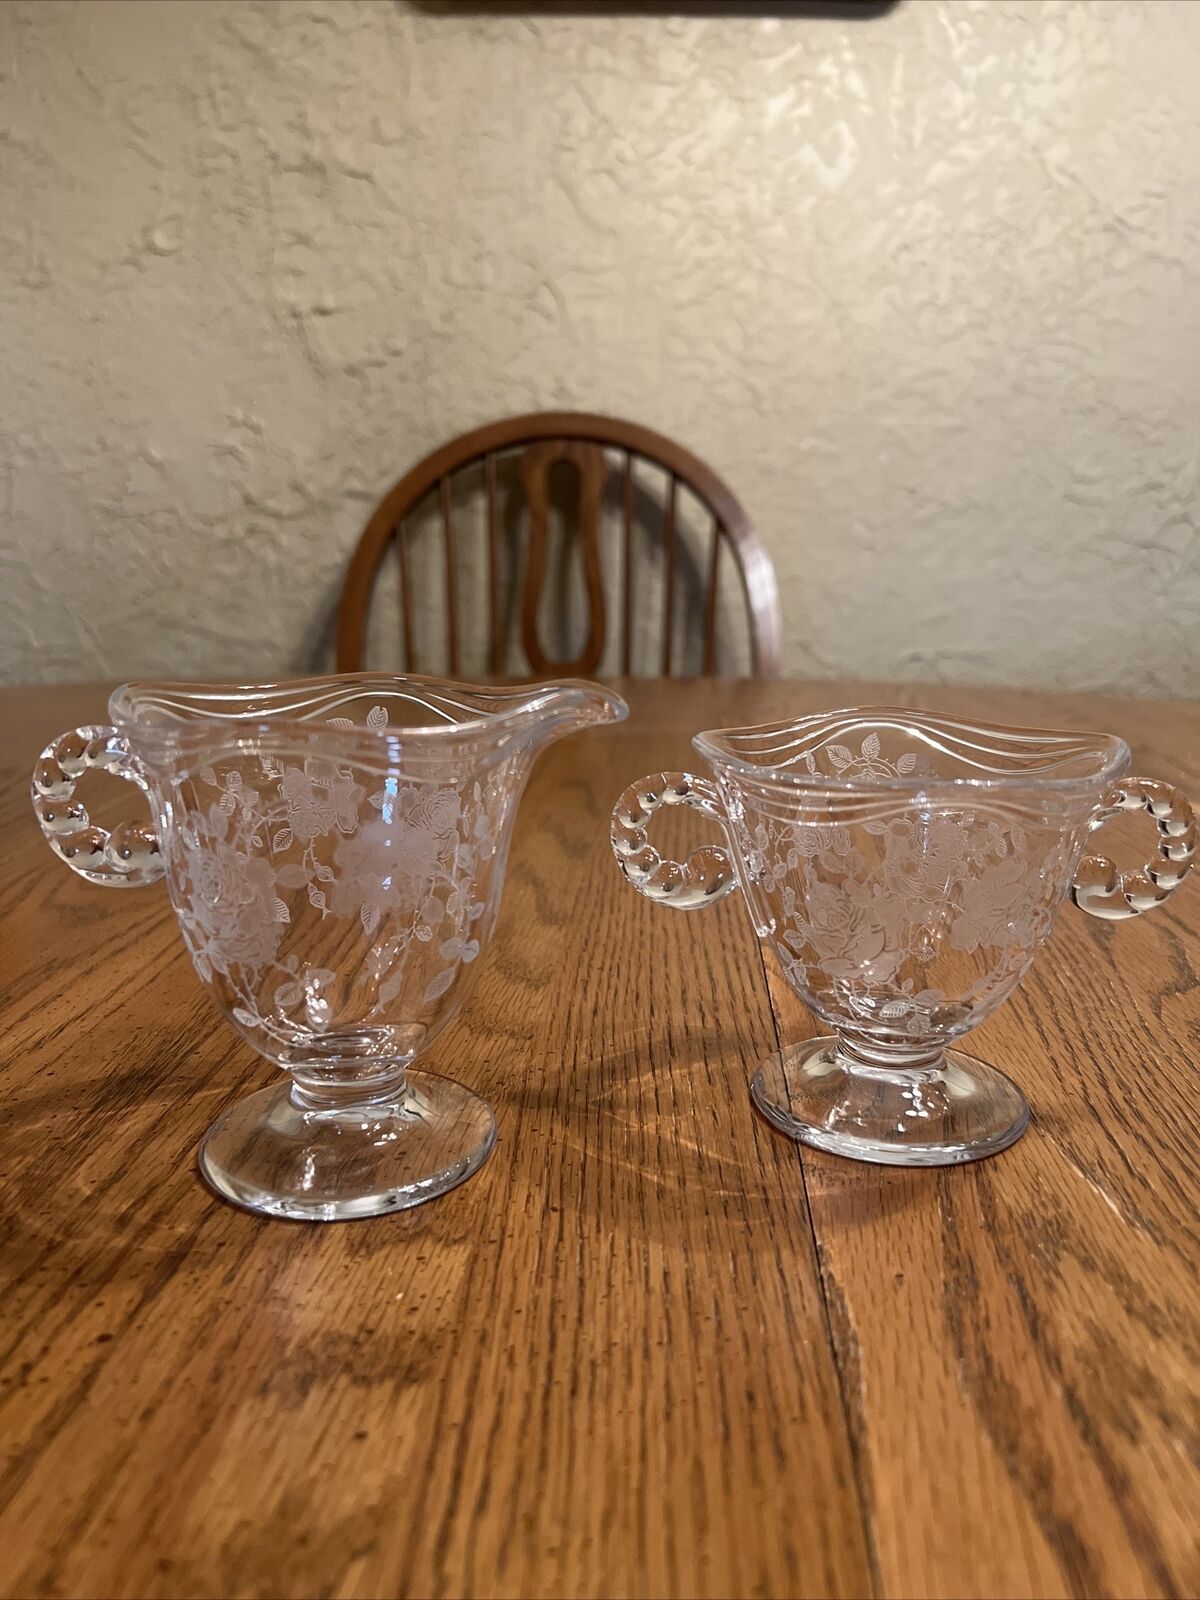 Fostoria Glass Willowmere Etched Roses Creamer & Open Sugar Bowl